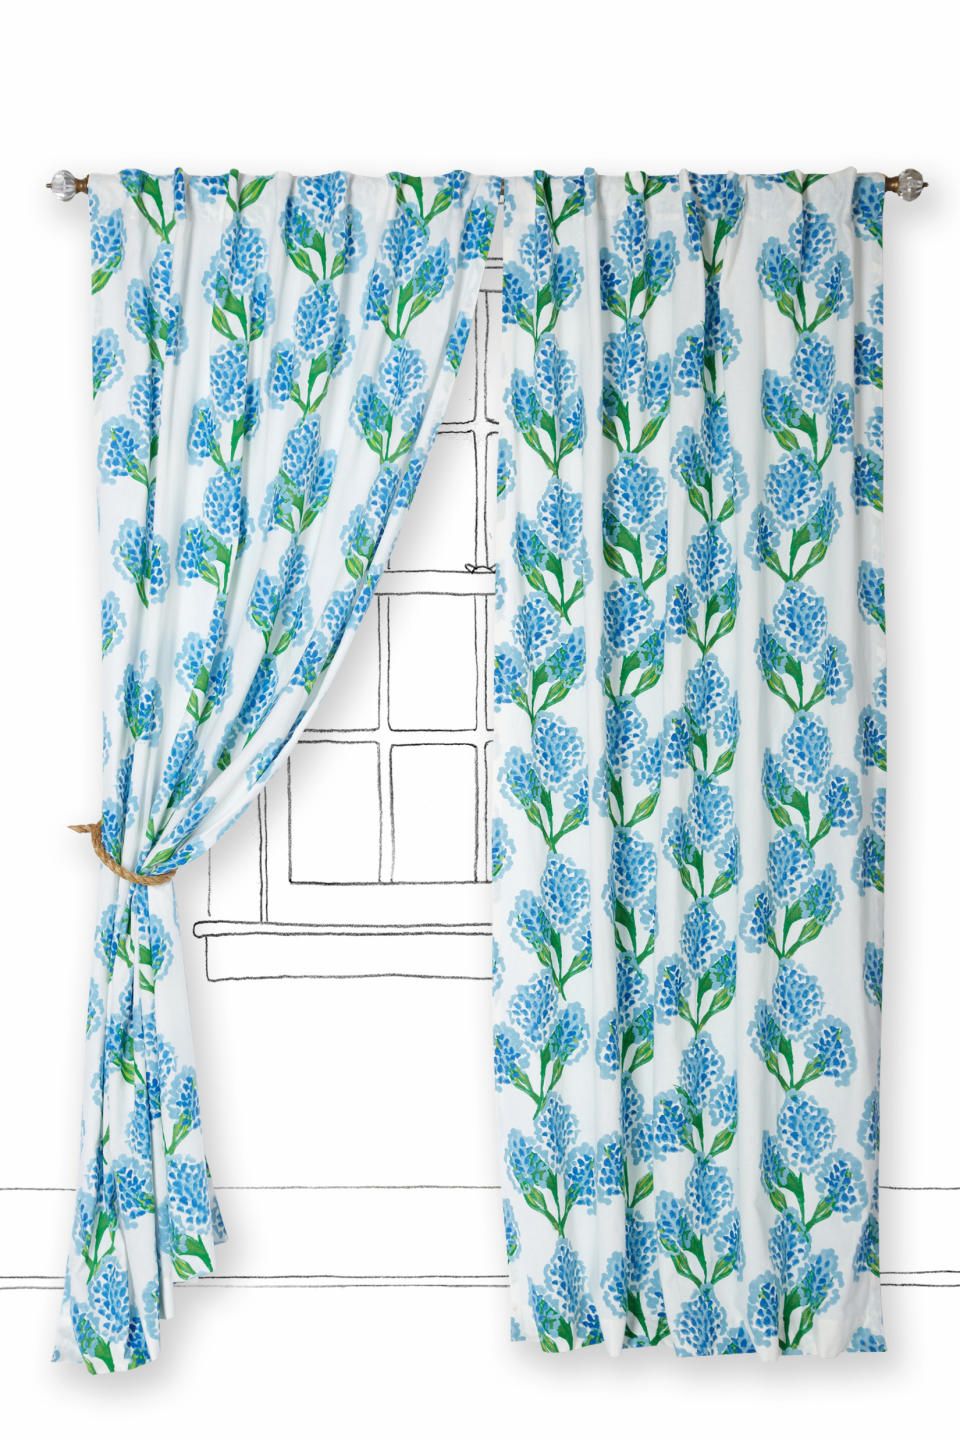 In this undated publicity photo provided by Anthropologie.com, the Speckled Blooms curtain has a repeat of hyacinth flowers, perfect for early spring. Pair it with a couple of painted furniture pieces and a rag rug for a fresh Scandinavian look. (AP Photo/Anthropologie.com)